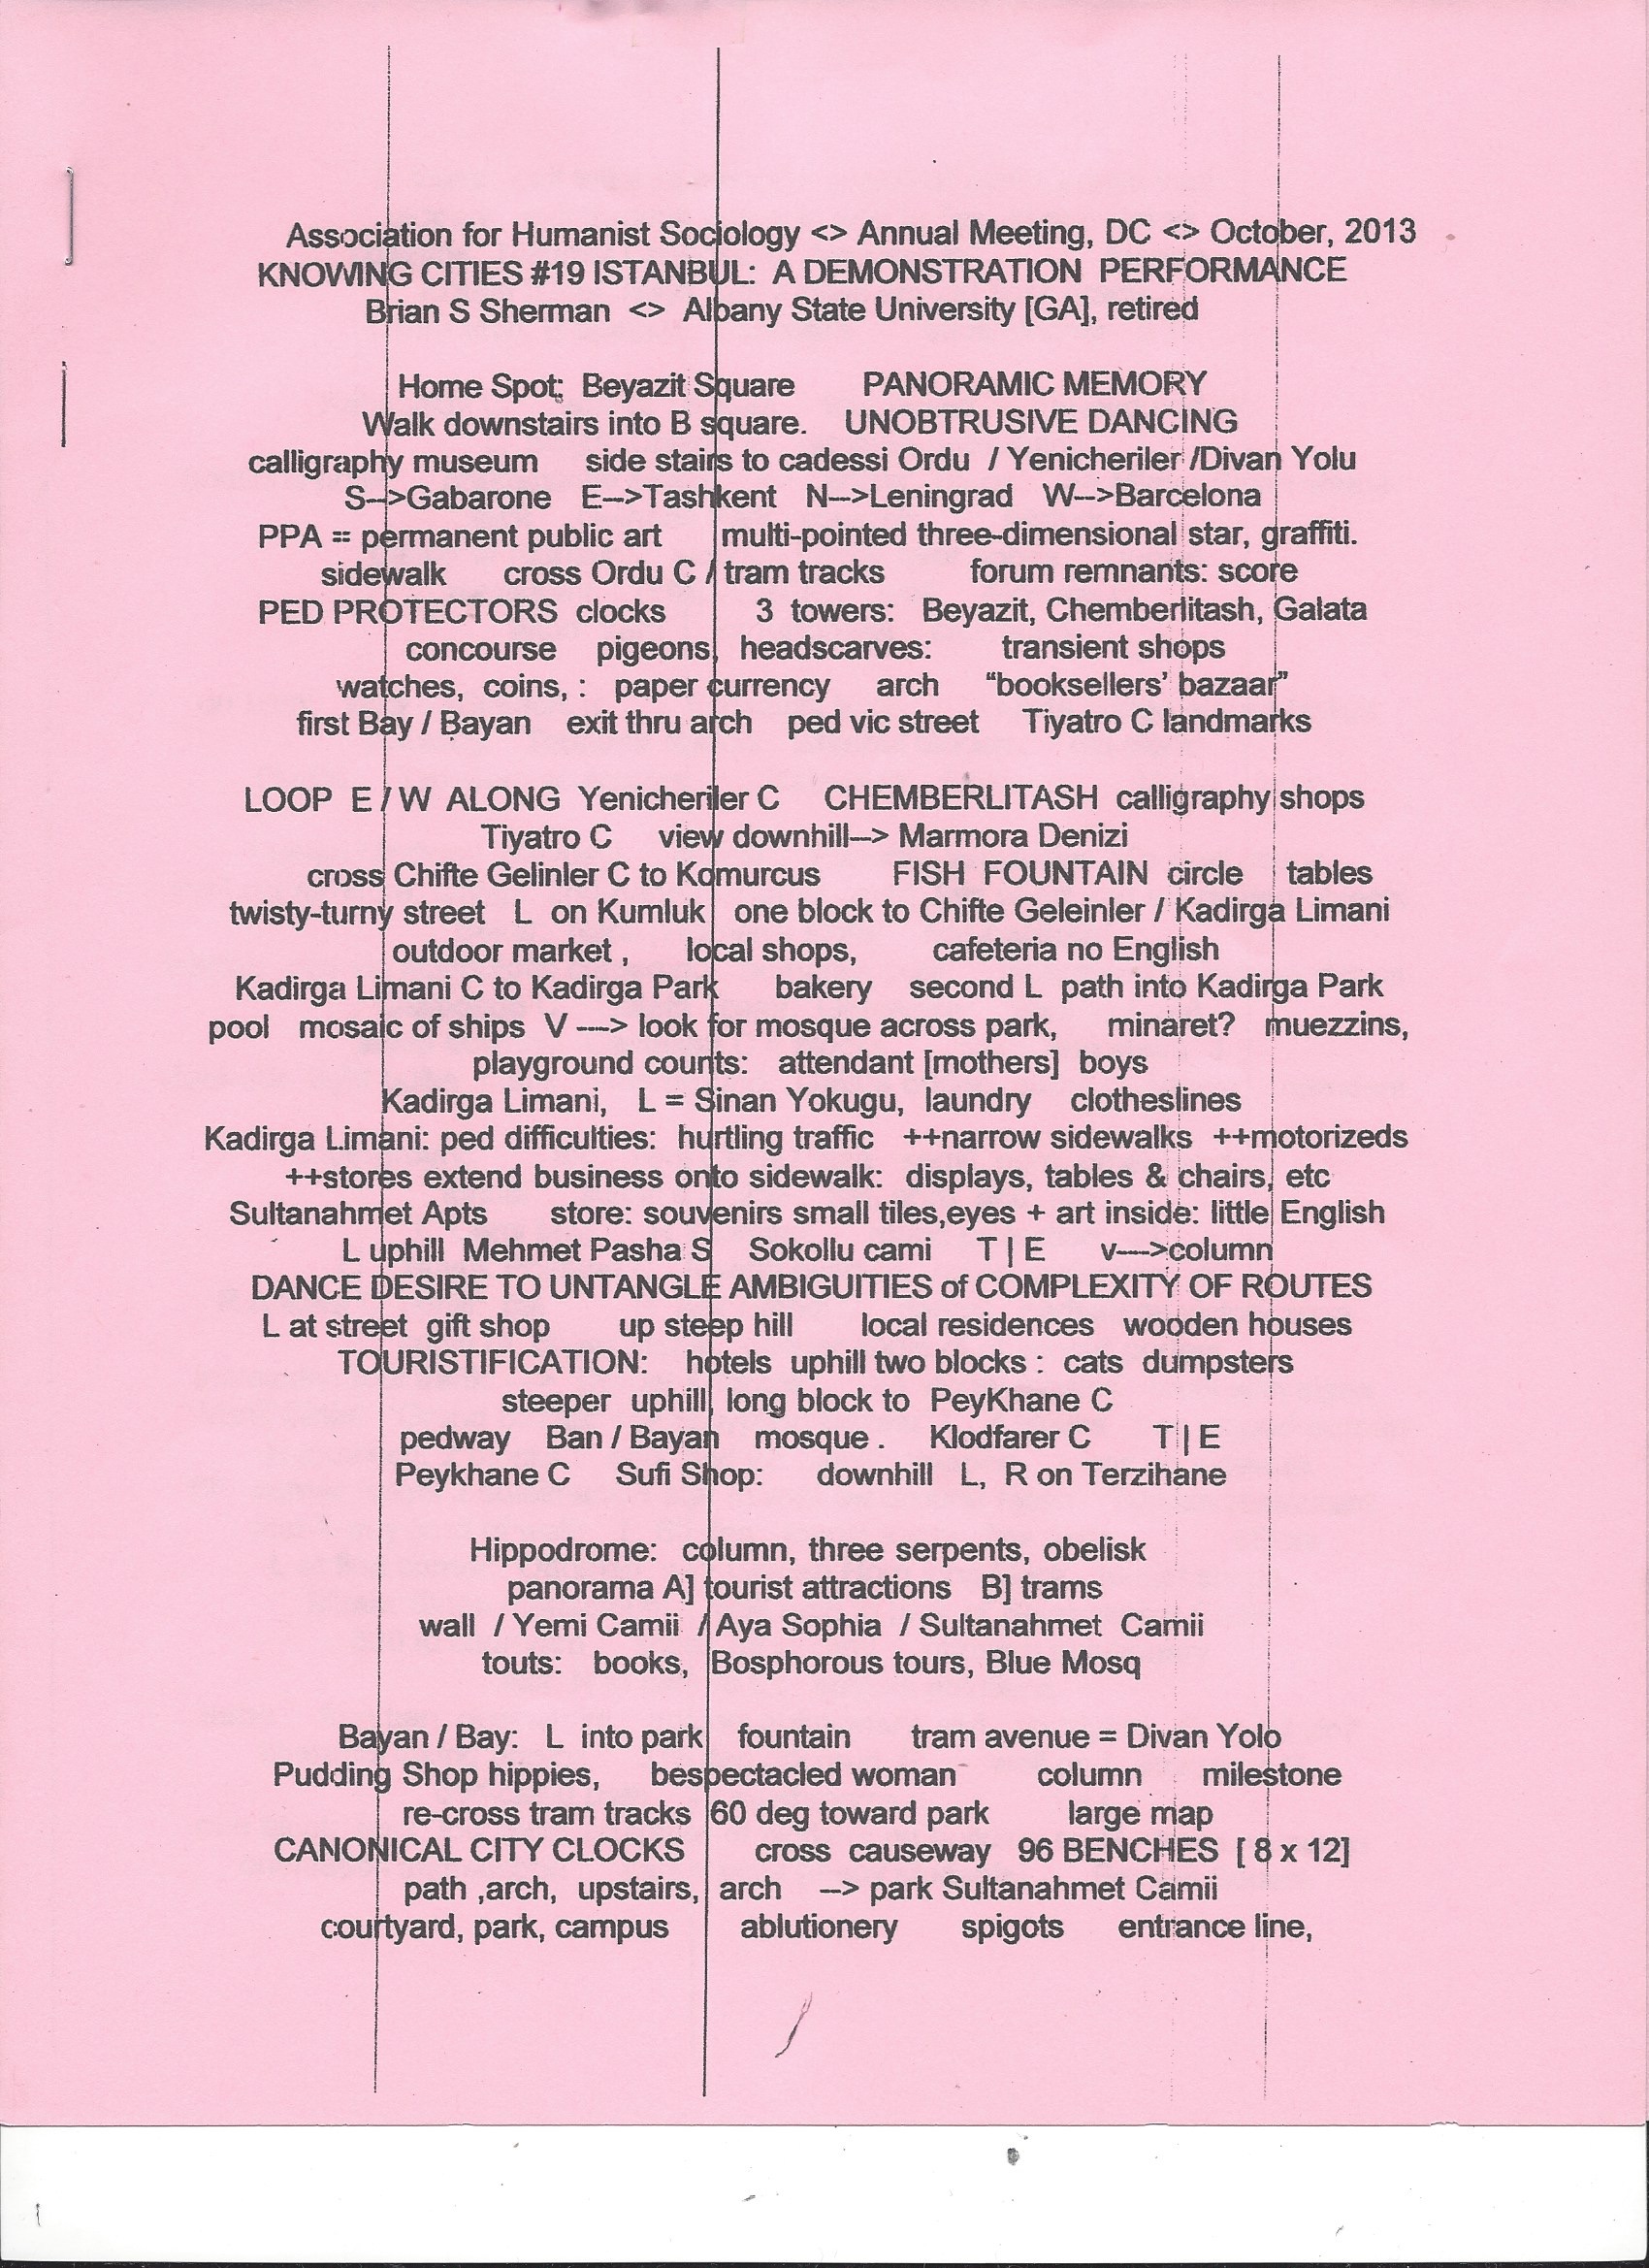 scanned document of written text on pink paper